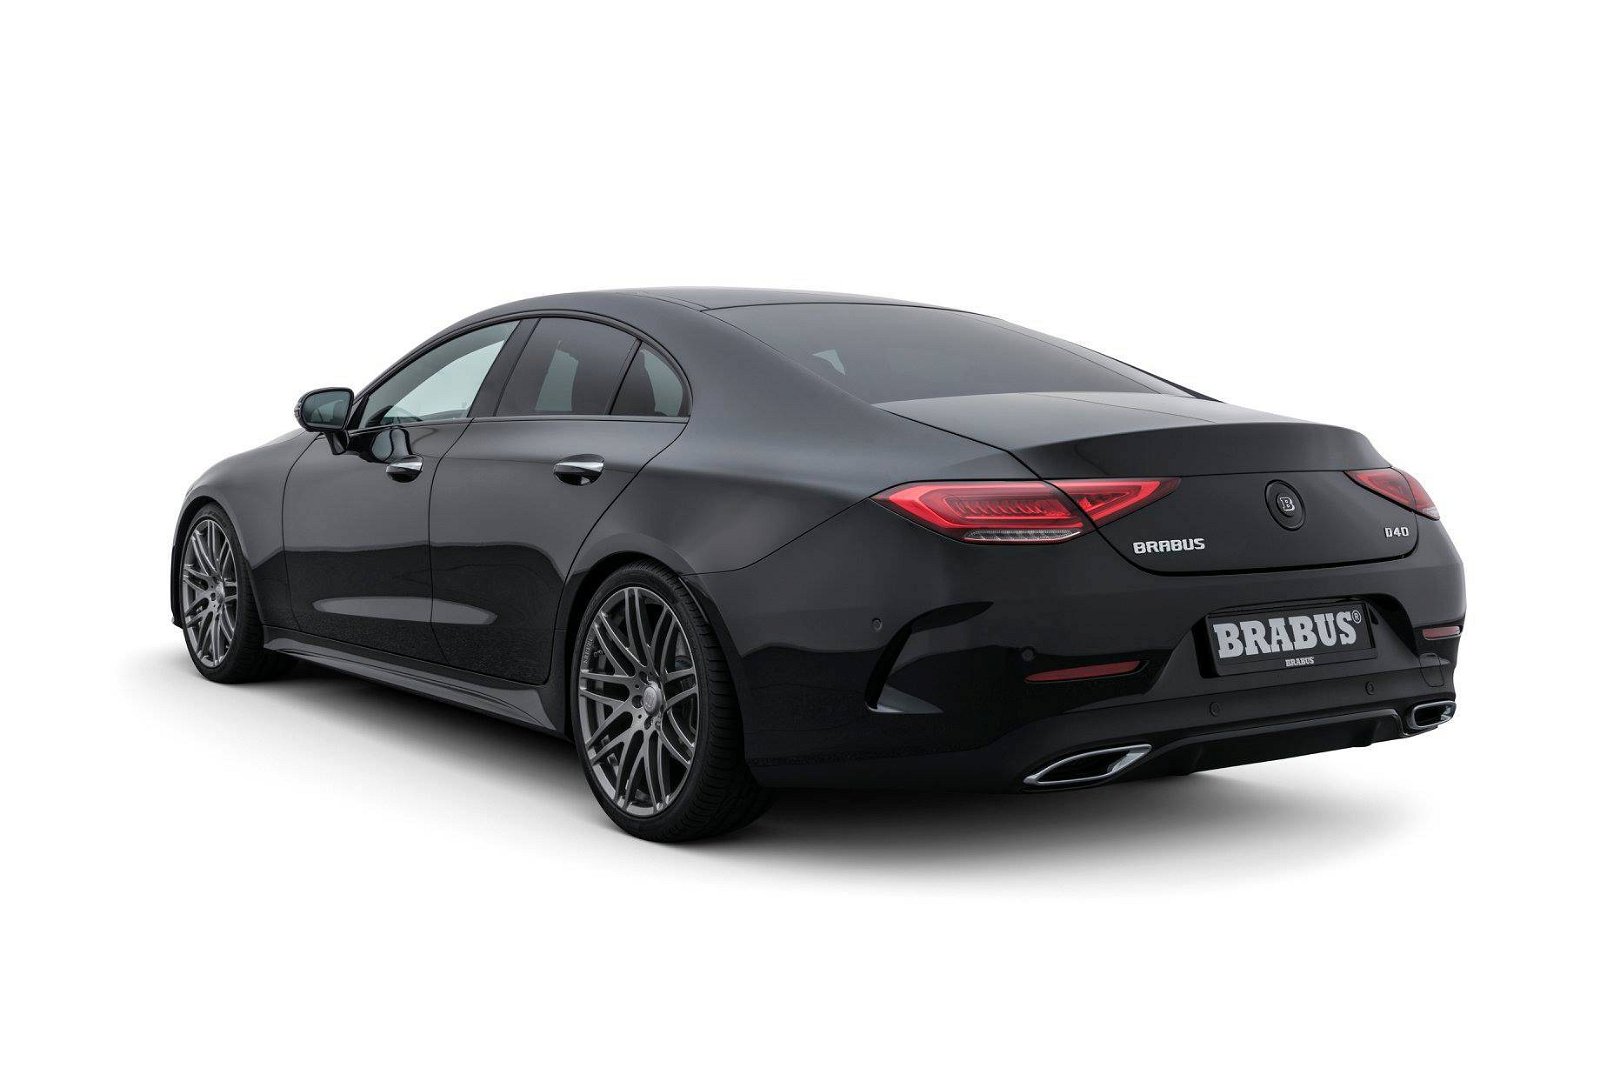 2019-Mercedes-Benz-CLS-tuned-by-Brabus-2